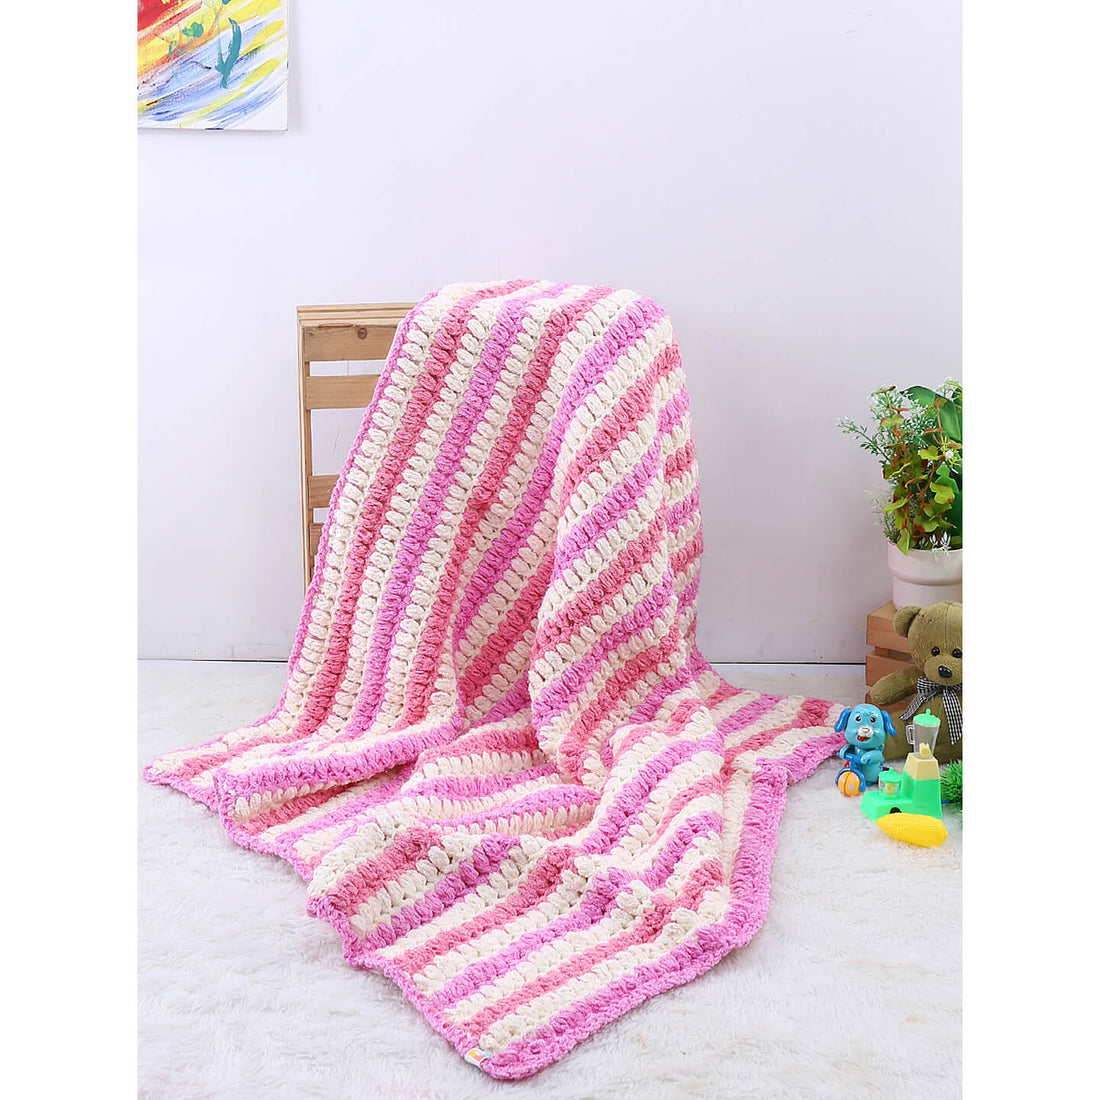 Soft Chenille Striped Baby Blanket - Pink 2614